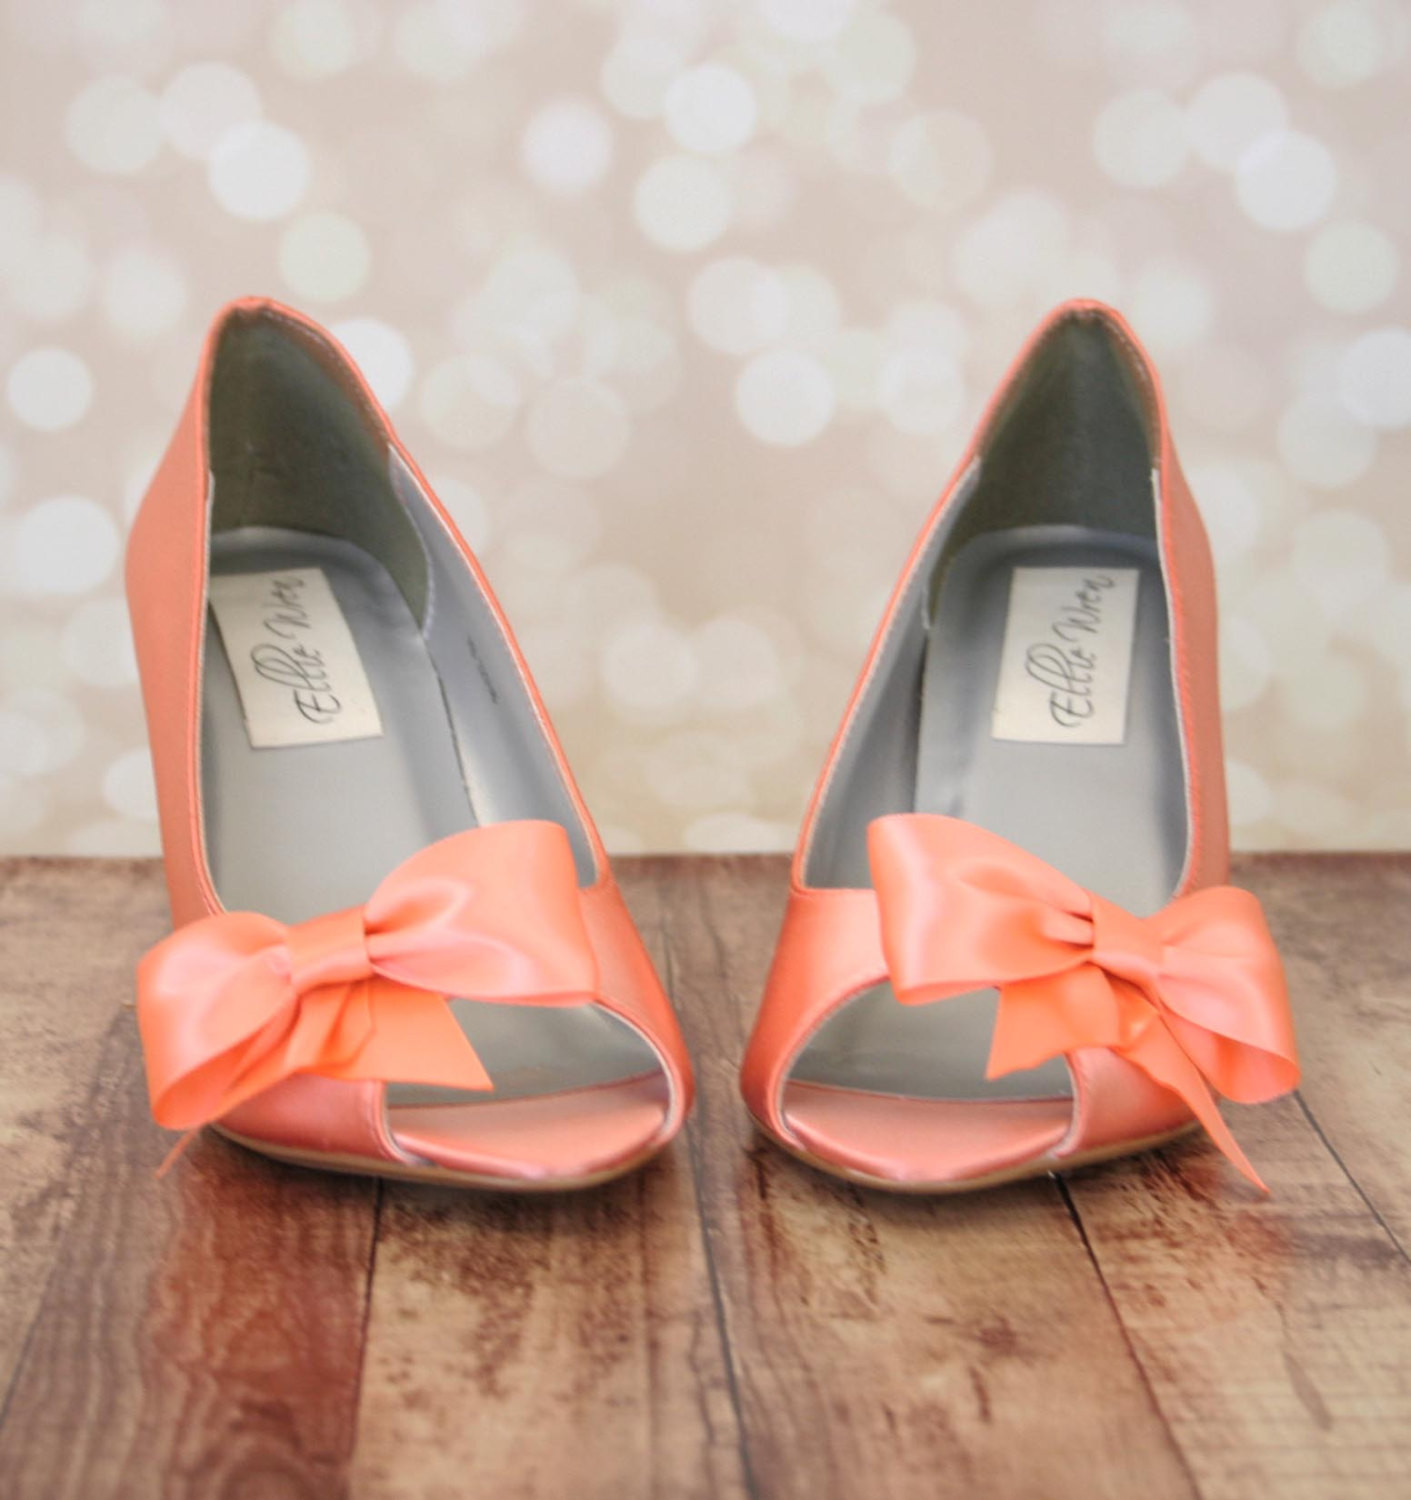 Peach Wedding Shoes
 Peach Wedding Shoes Wedding Shoe Wedges by